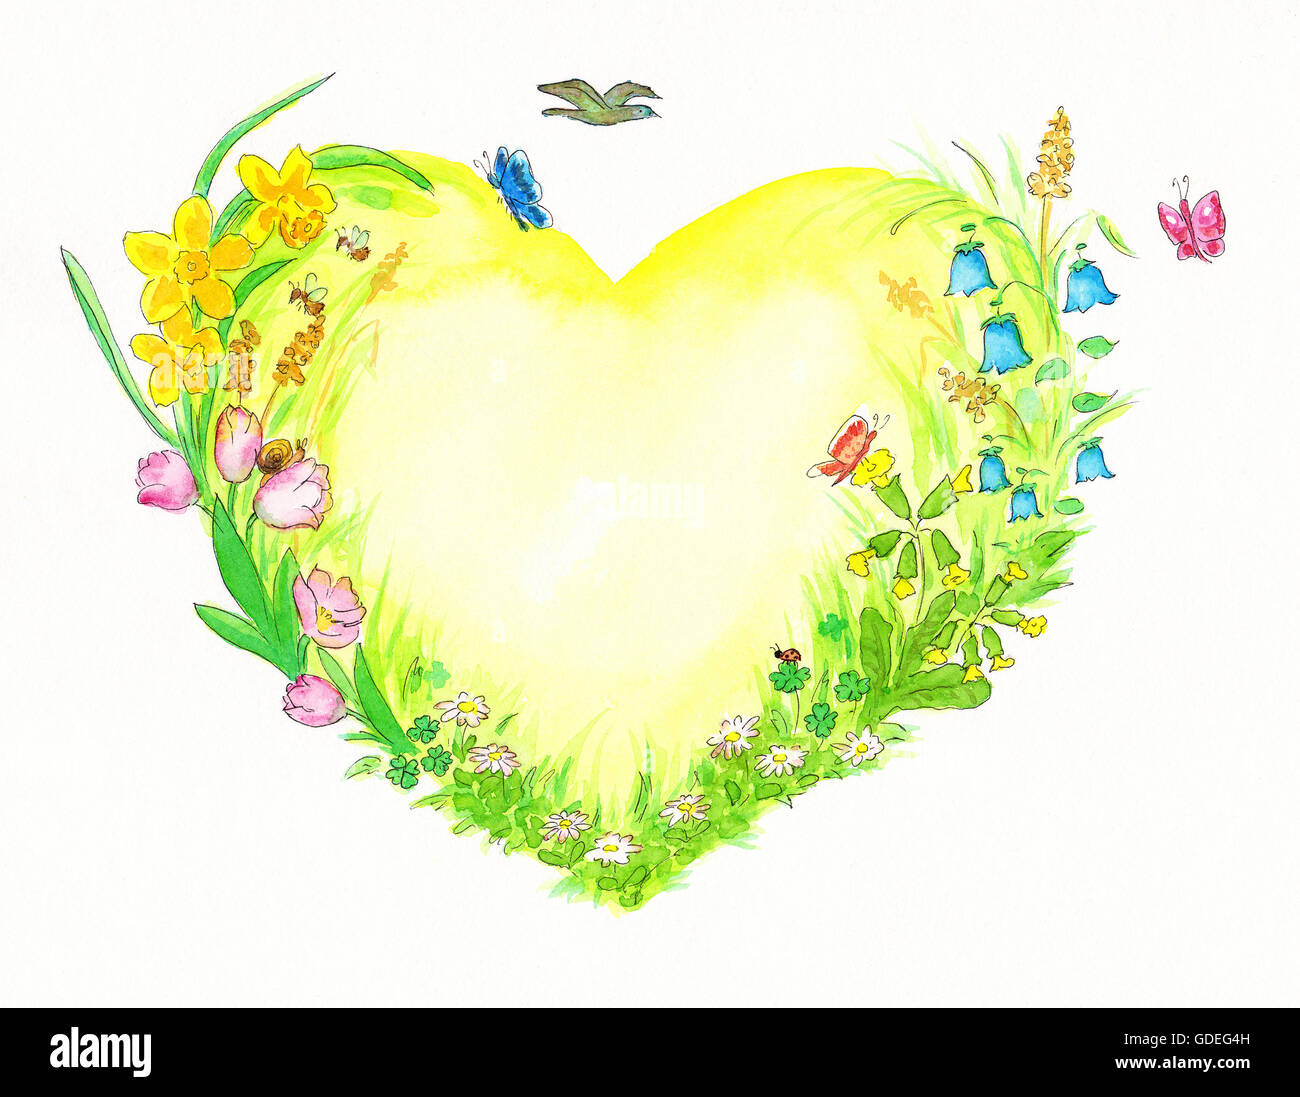 Yellow and green heart watercolor painting with spring related themes Stock Photo